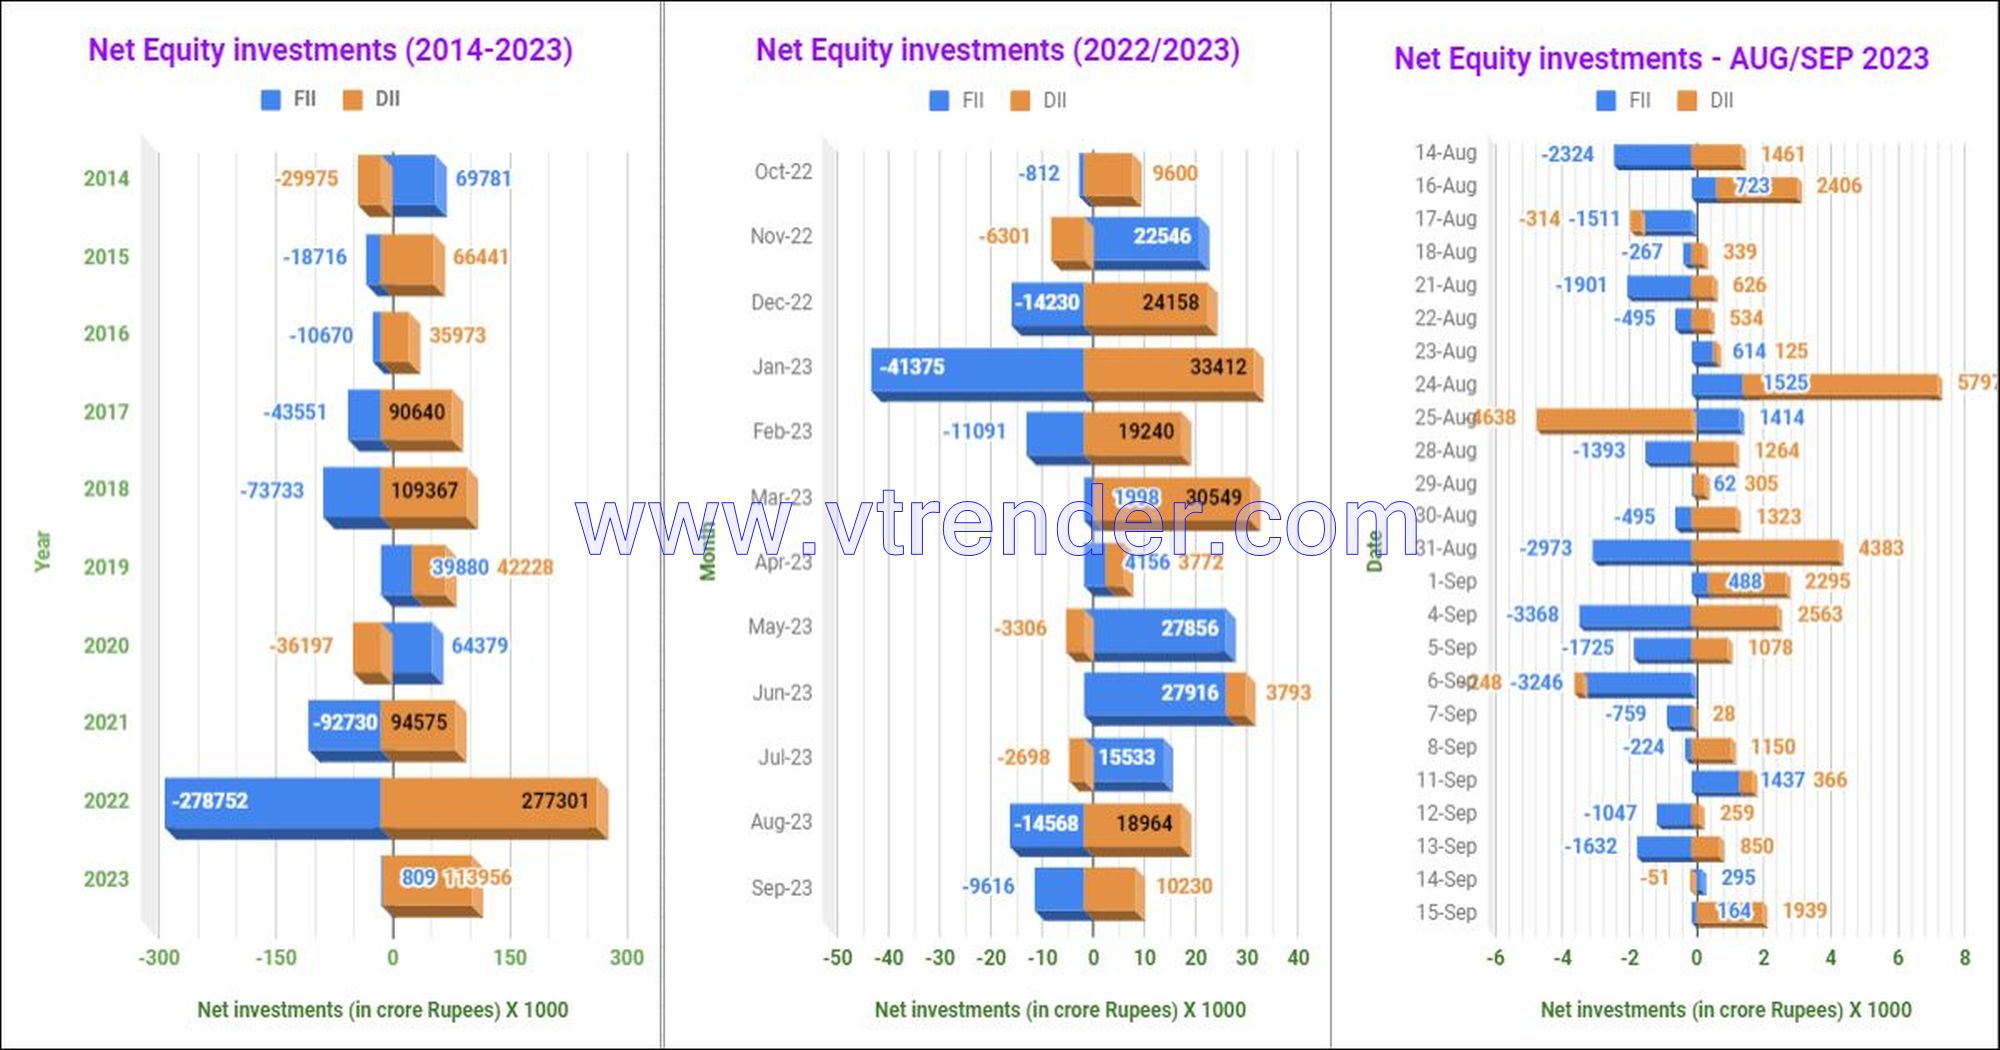 Netequity15Sep Participantwise Net Open Interest And Net Equity Investments – 15Th Sep 2023 Ce, Client, Dii, Fii, Index Futures, Index Options, Open Interest, Pe, Prop, Stocks Futures